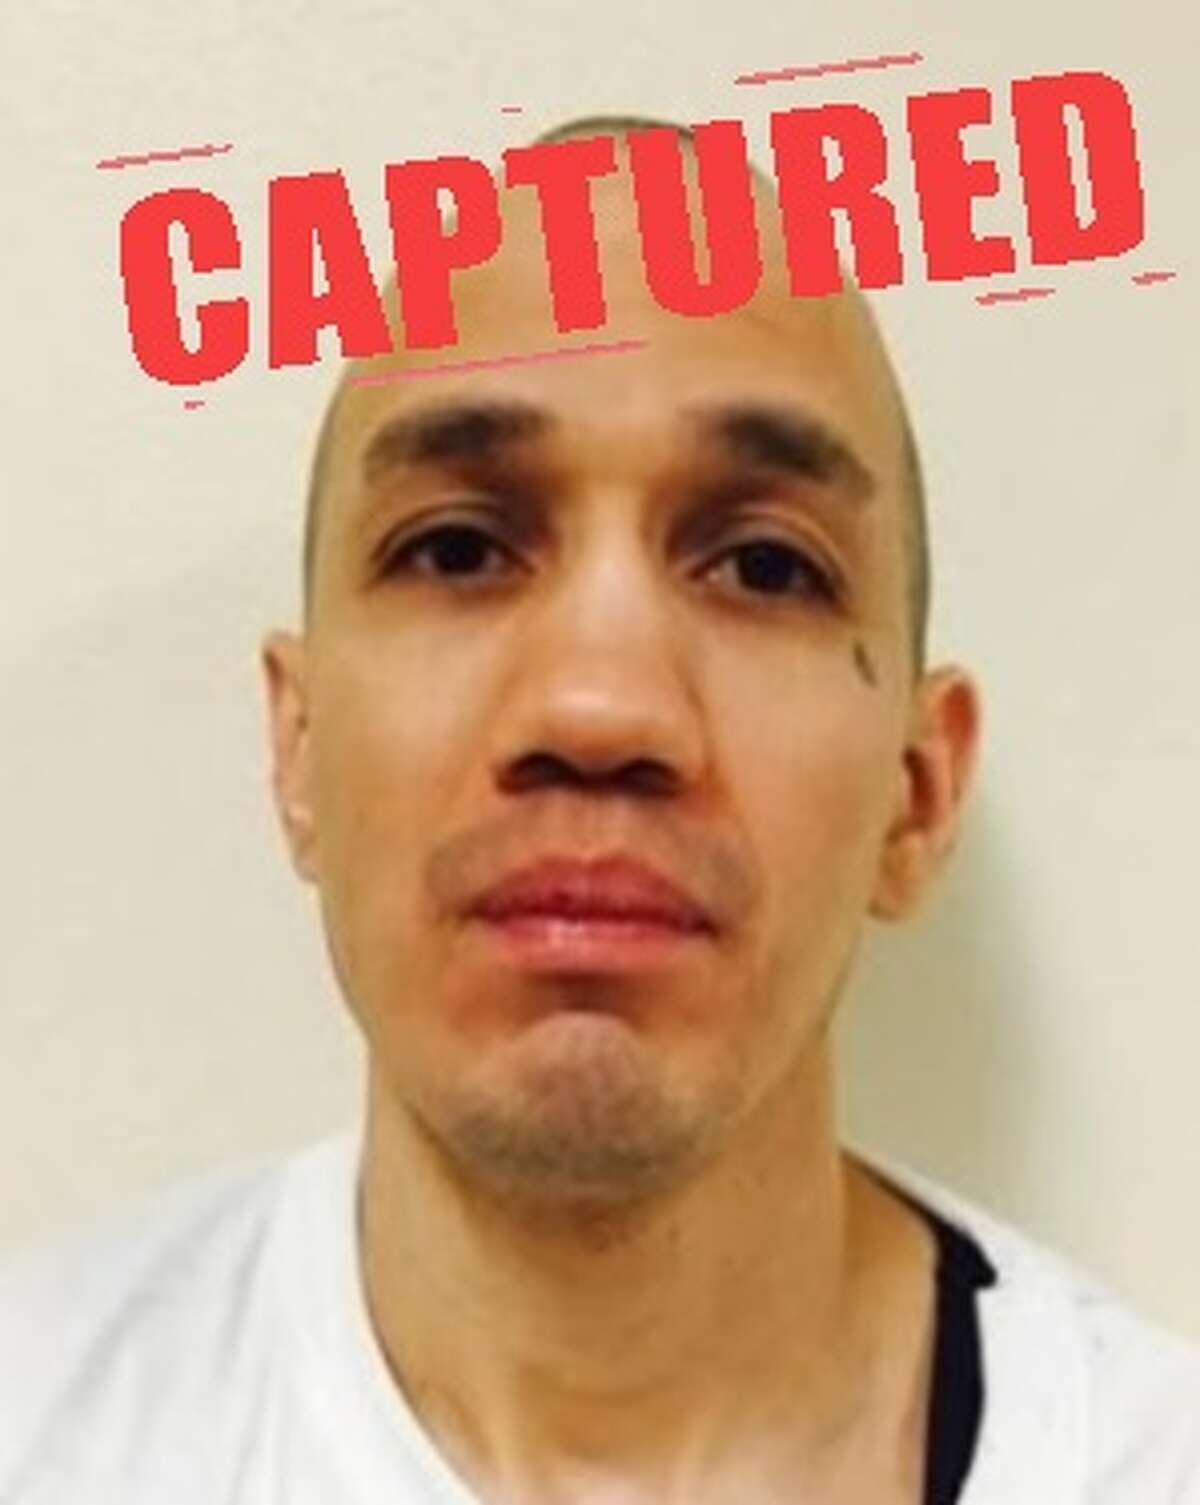 Rogelio Ayala Garcia, Jr. was captured by authorities on Feb. 17, 2016 in Mission, Texas. He was on the Texas 10 Most Wanted Fugitives and Sex Offenders list at some point in 2016.